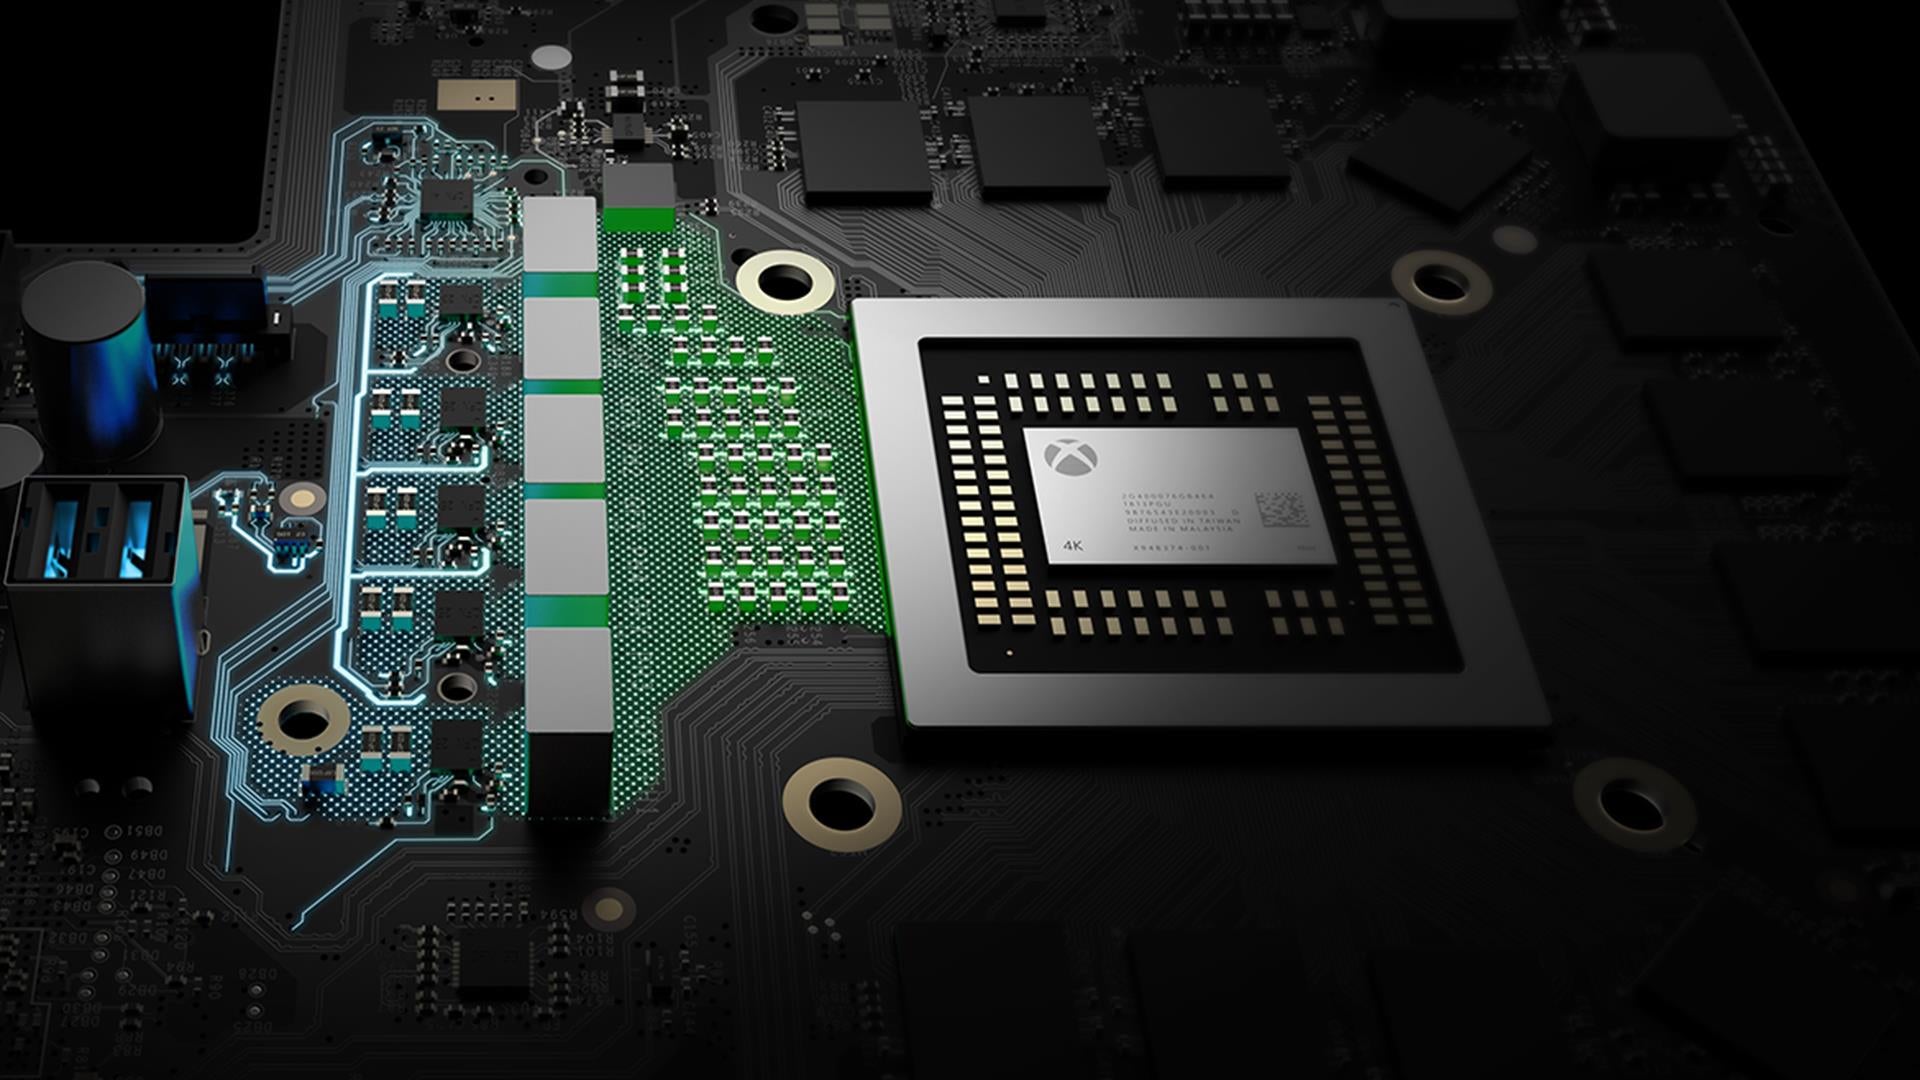 Image for Xbox Scorpio has the potential to "push Xbox One sales ahead of PS4 in the US" this year, per NPD